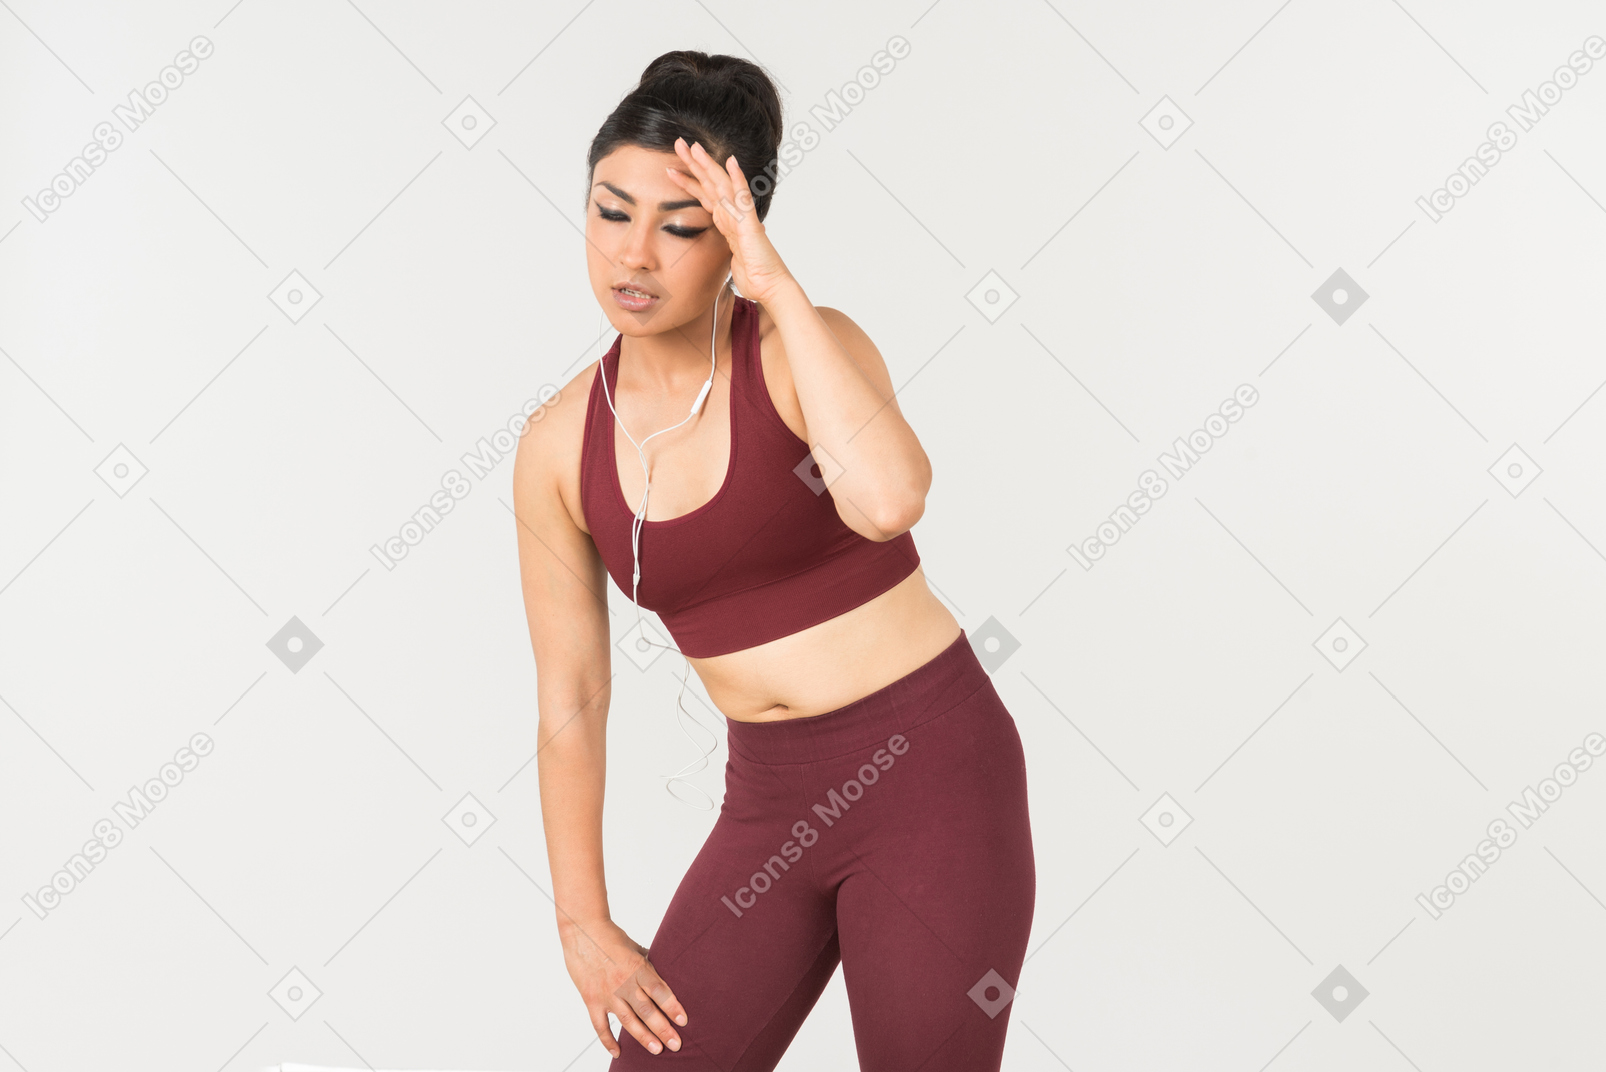 Tired looking young indian woman in sporstwear standing with headphones on her neck